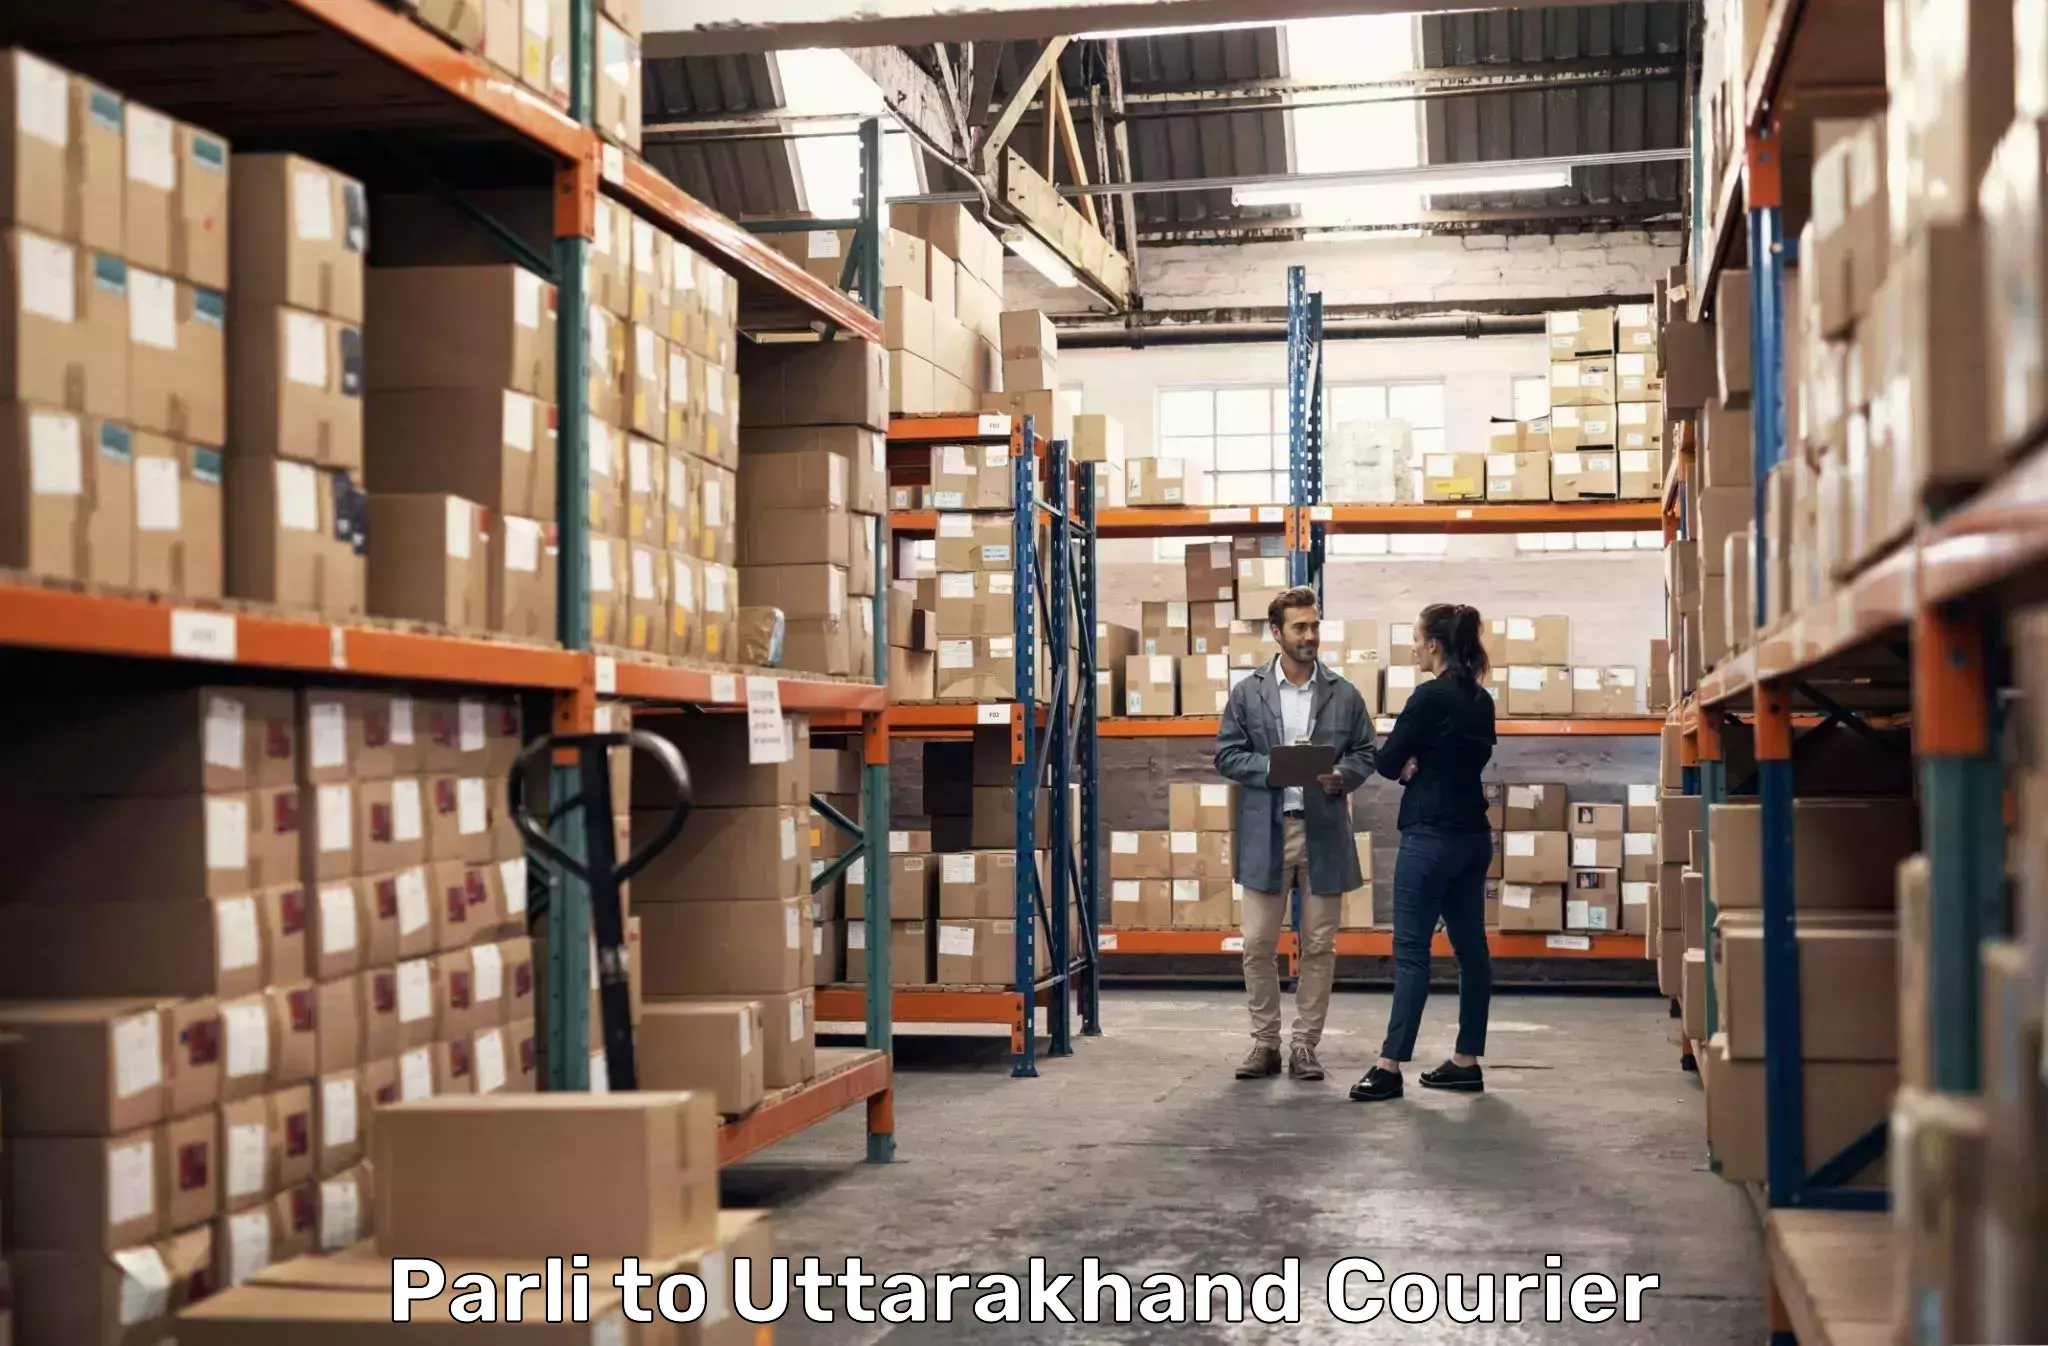 Multi-national courier services Parli to Uttarakhand